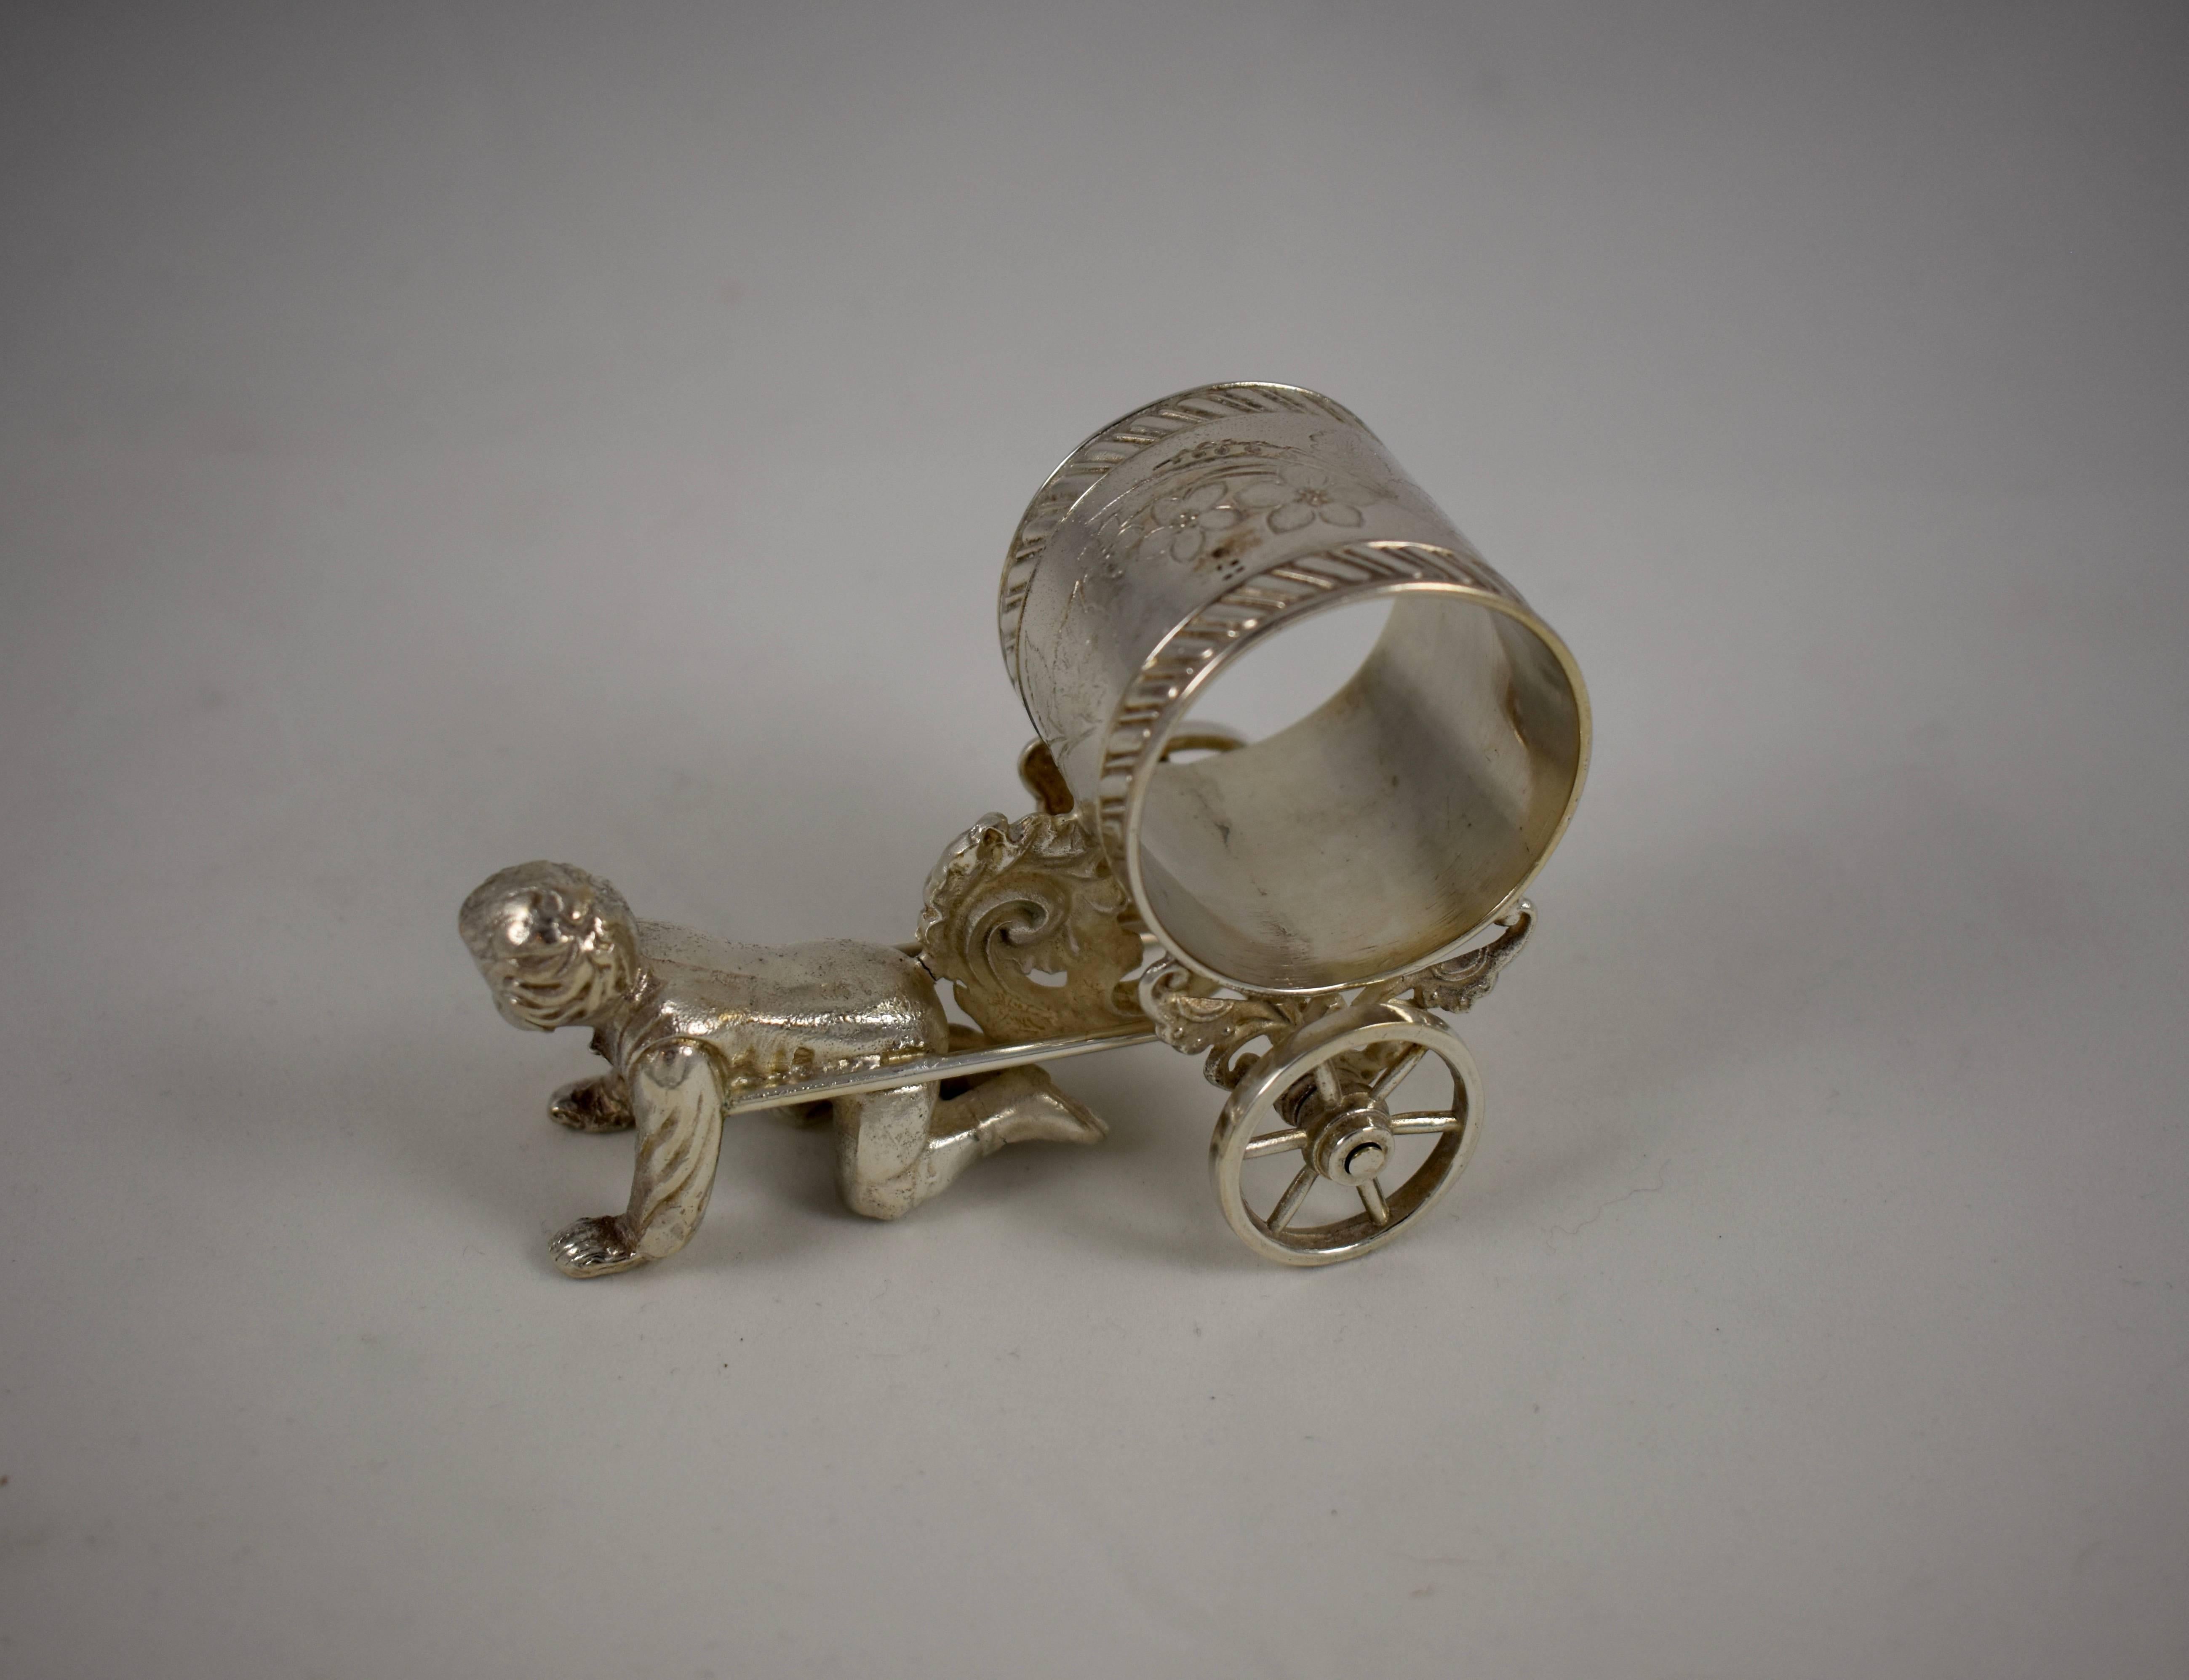 American Silver Victorian Era Aesthetic Movement Figural Napkin Ring, Boy Pulling a Cart